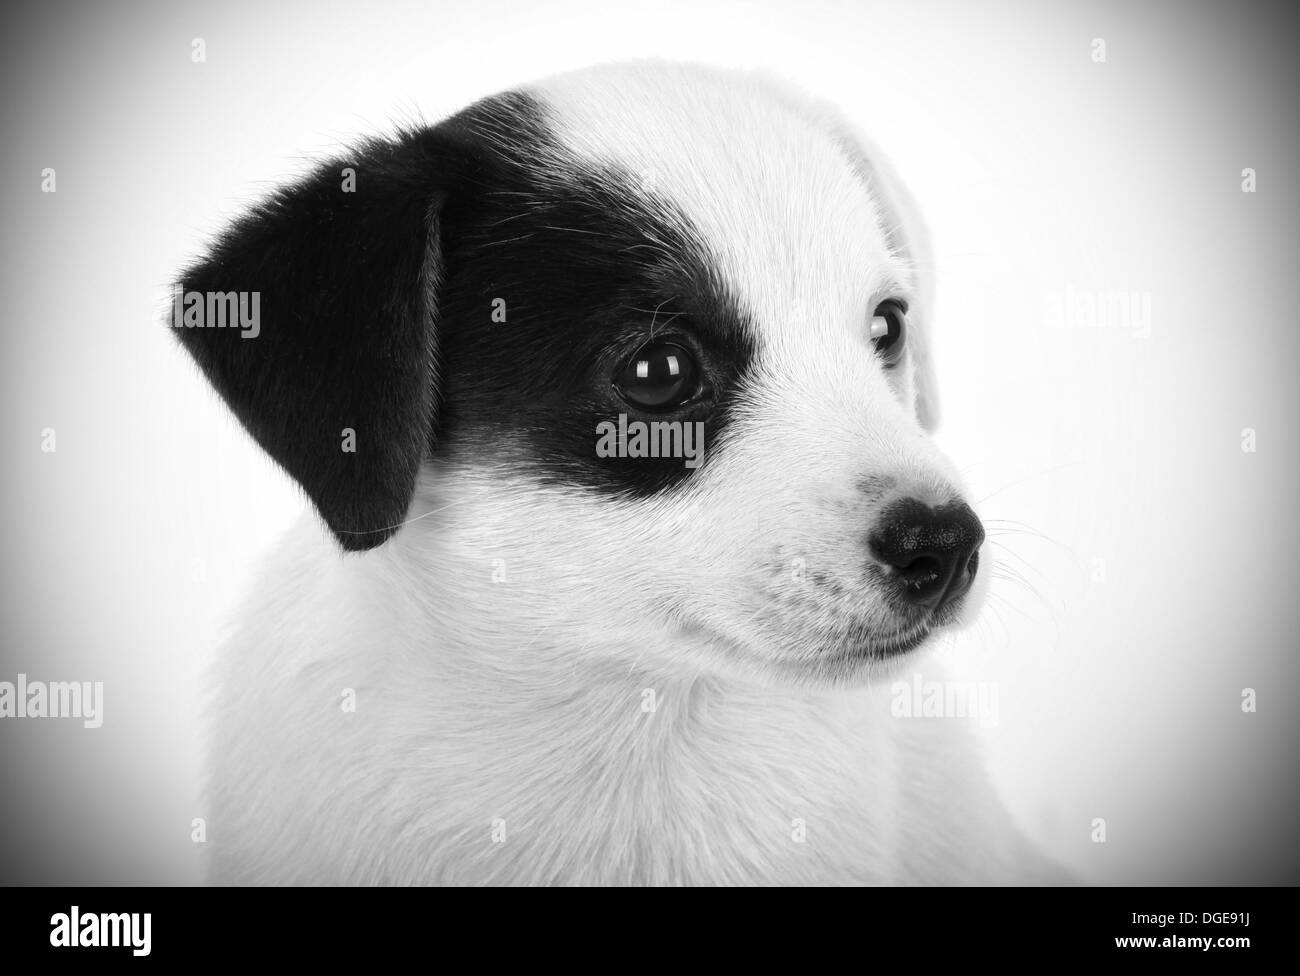 Meet the Adorable Black and White Long Haired Jack Russell Terrier ...